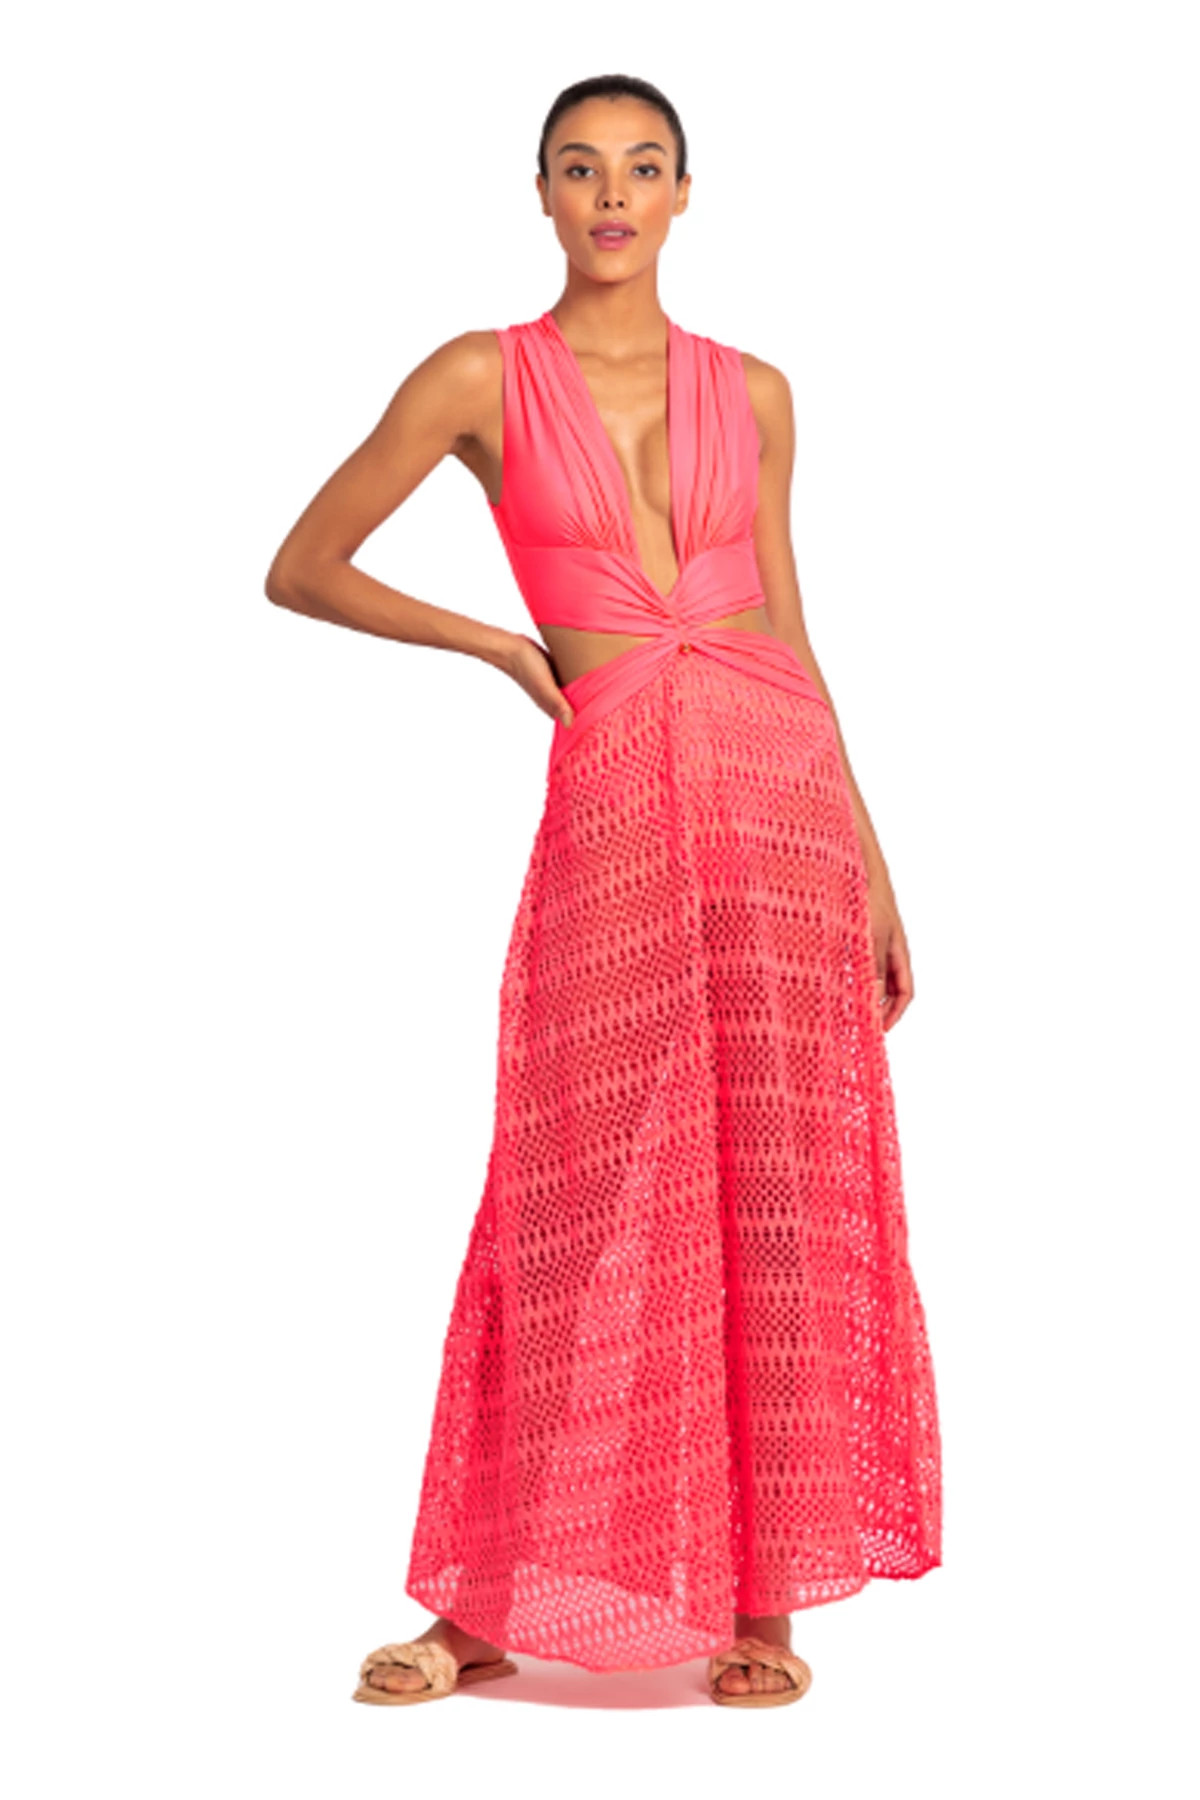 NEON CORAL Plunge Crochet Beach Dress image number 1